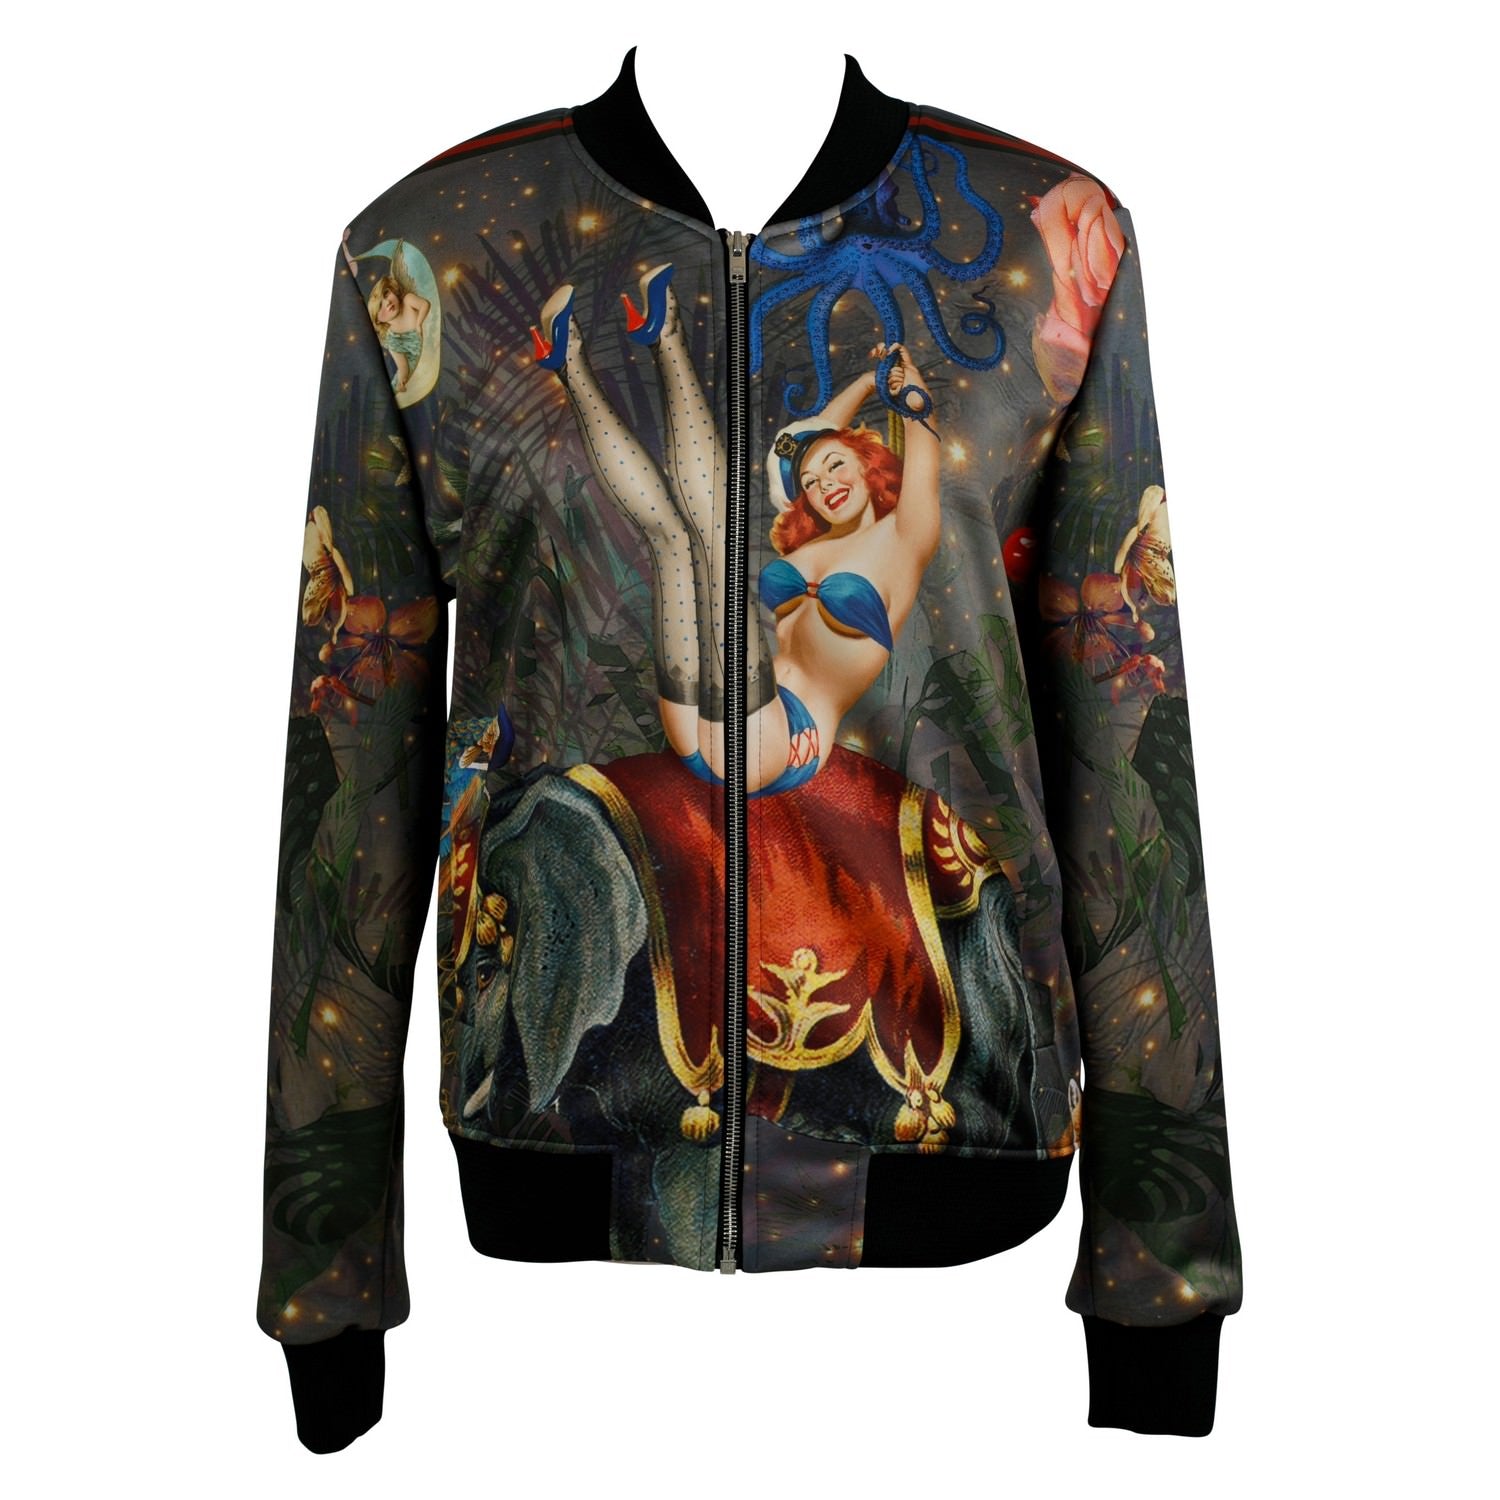 A luxury softshell bomber jacket in a maximalist retro pinup design called - Fifi